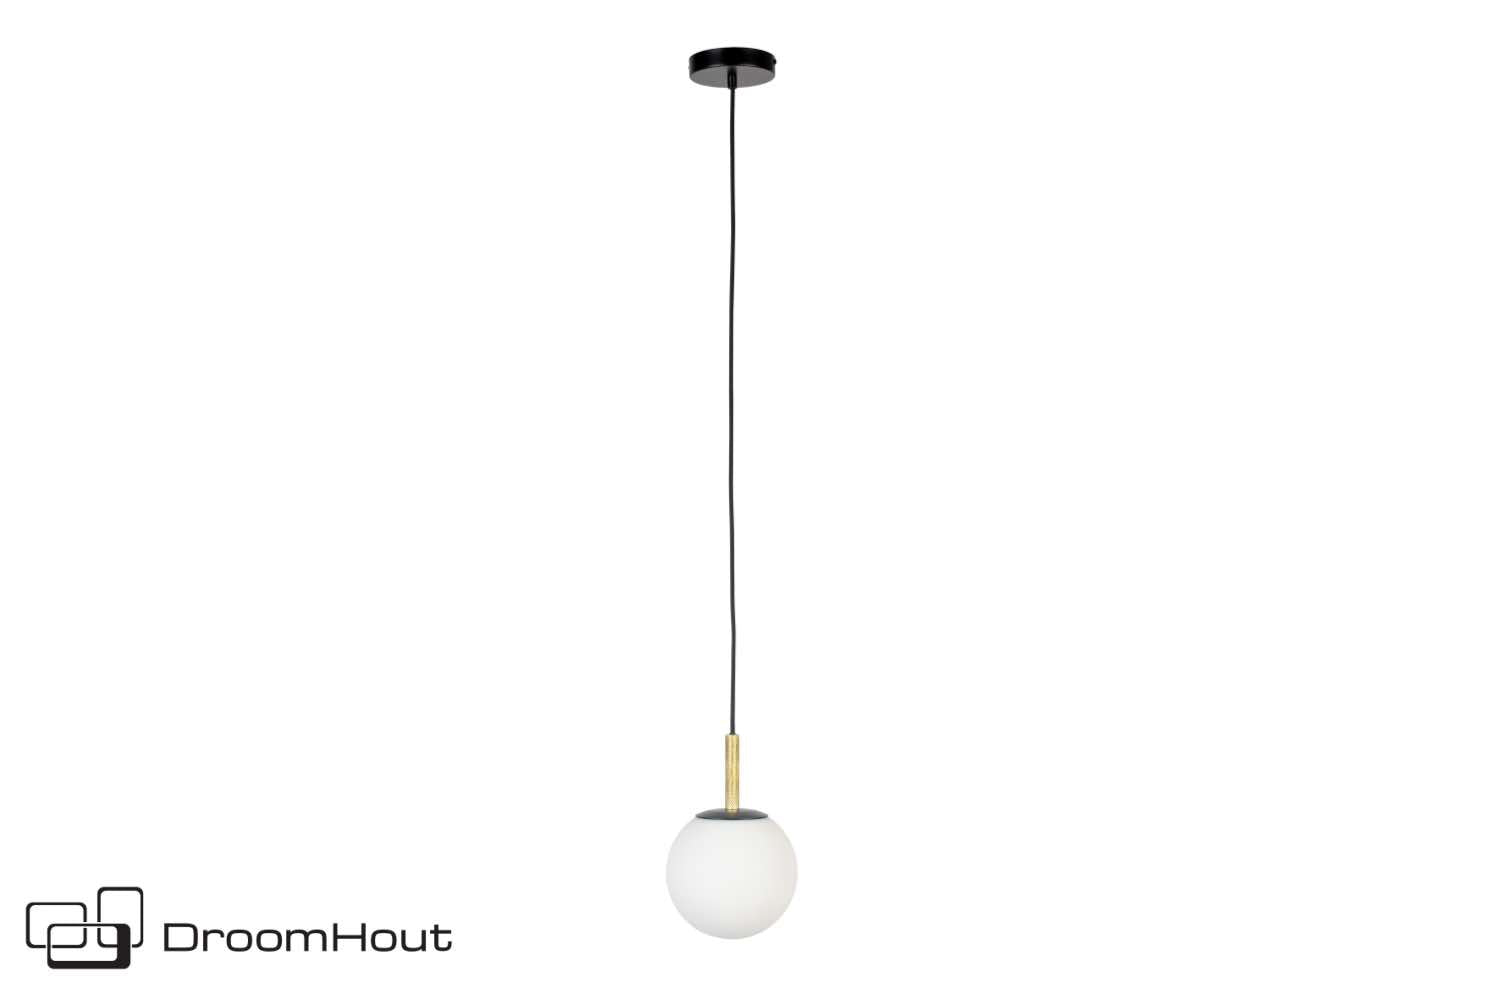 Hanglamp Zuiver Orion